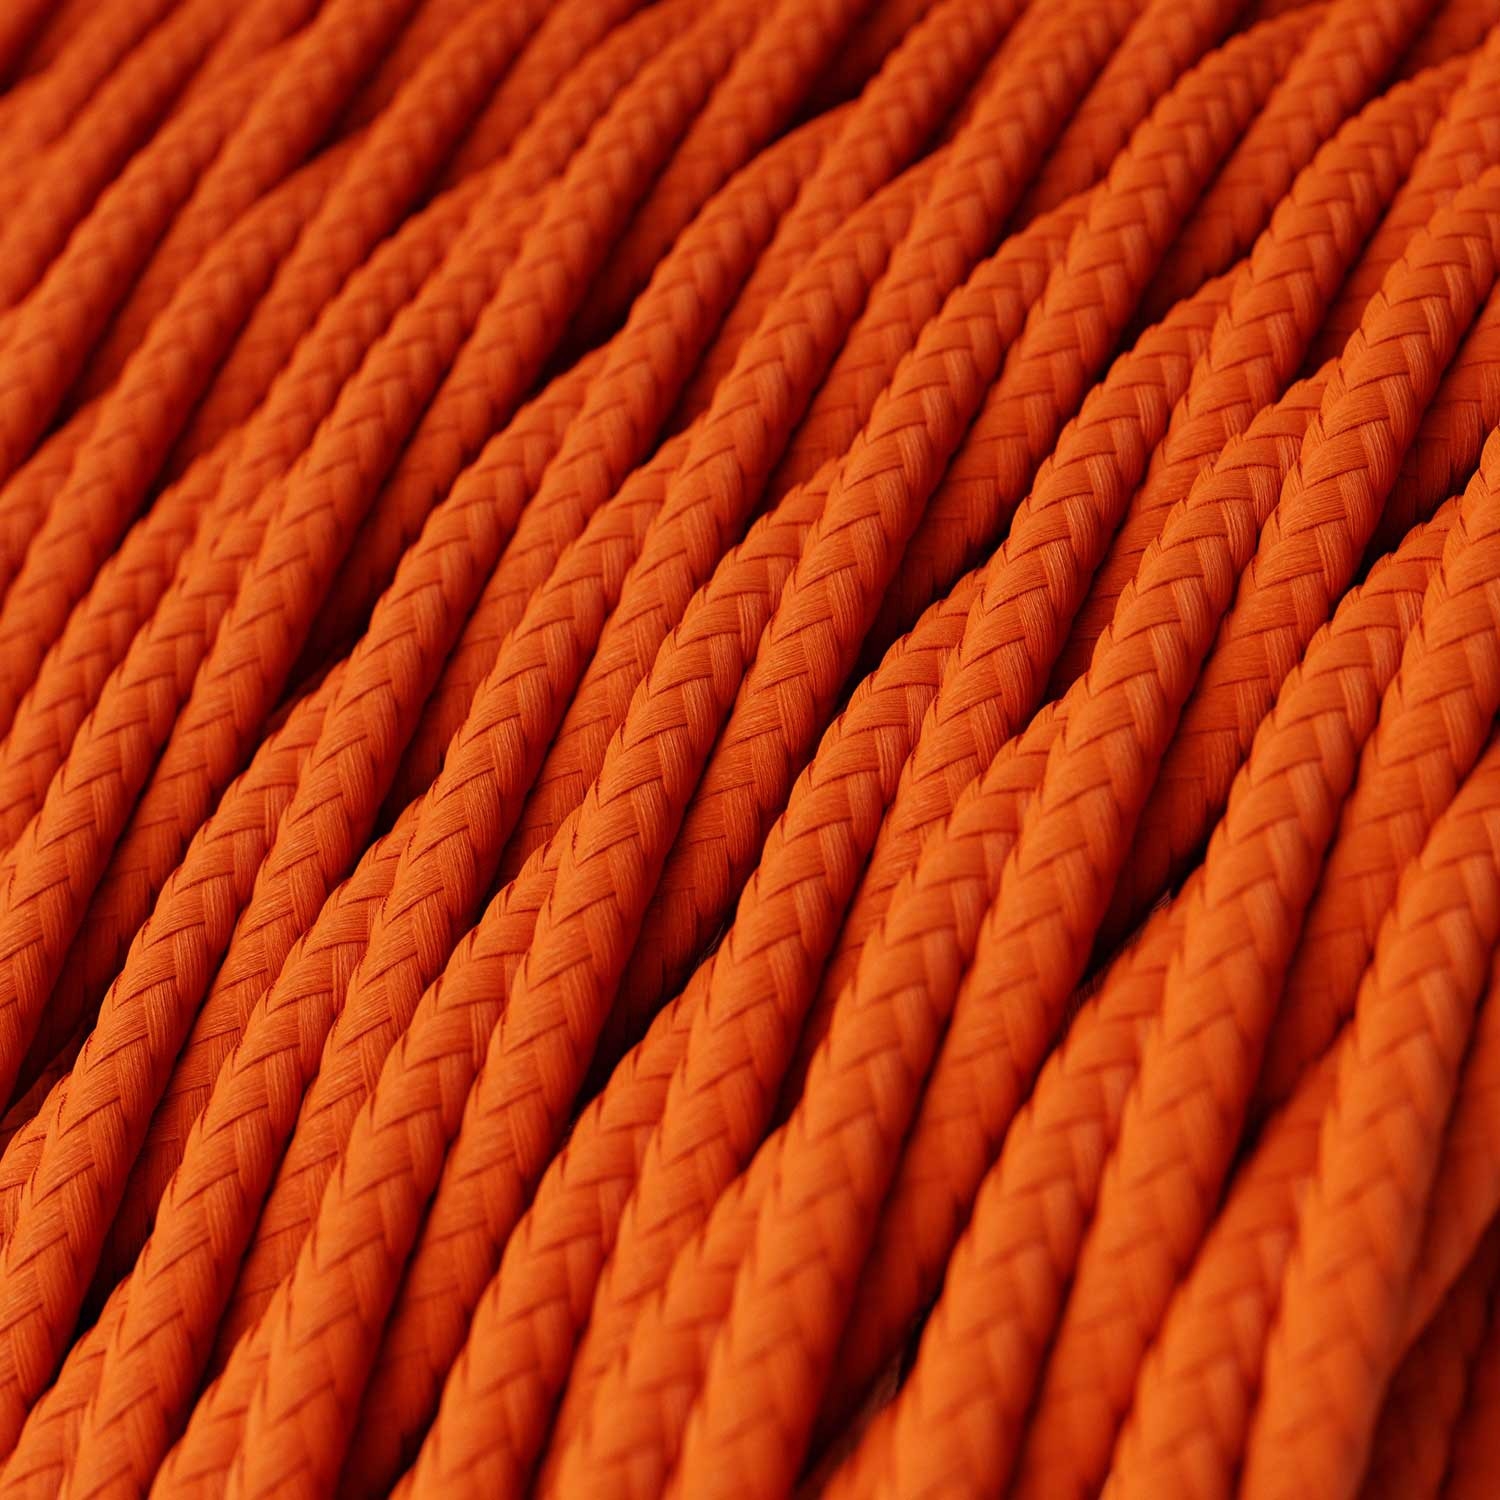 Orange Rayon covered Twisted electric cable 2x18 AWG - TM15